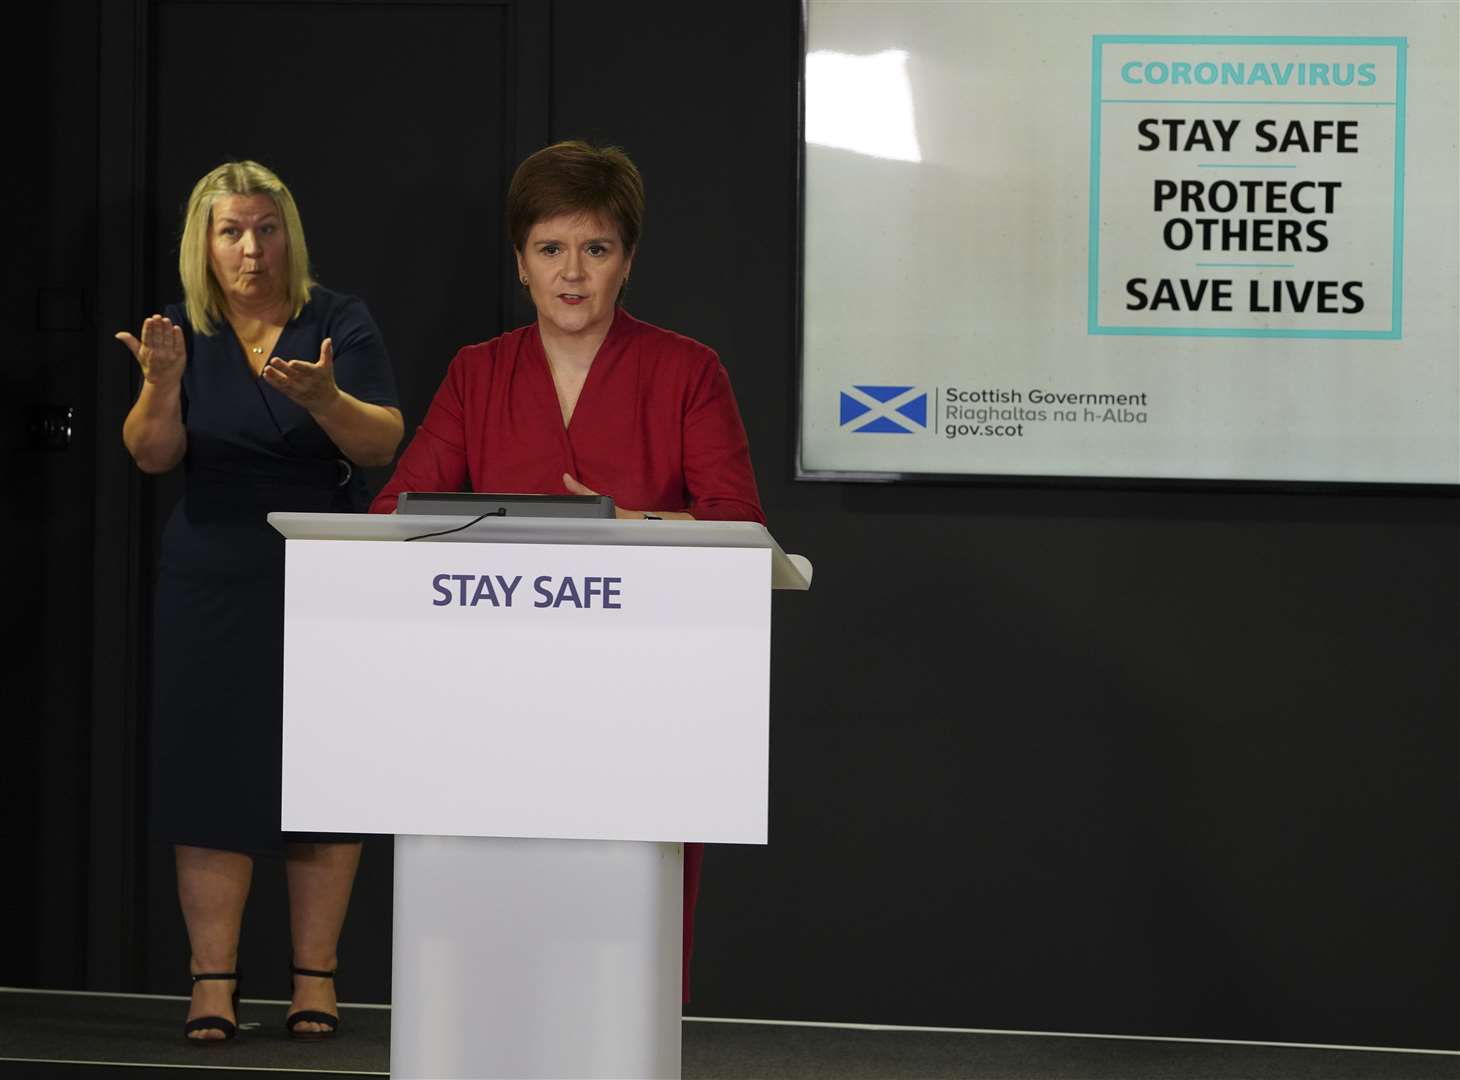 Nicola Sturgeon says the Scottish Government is still taking a cautious approach.